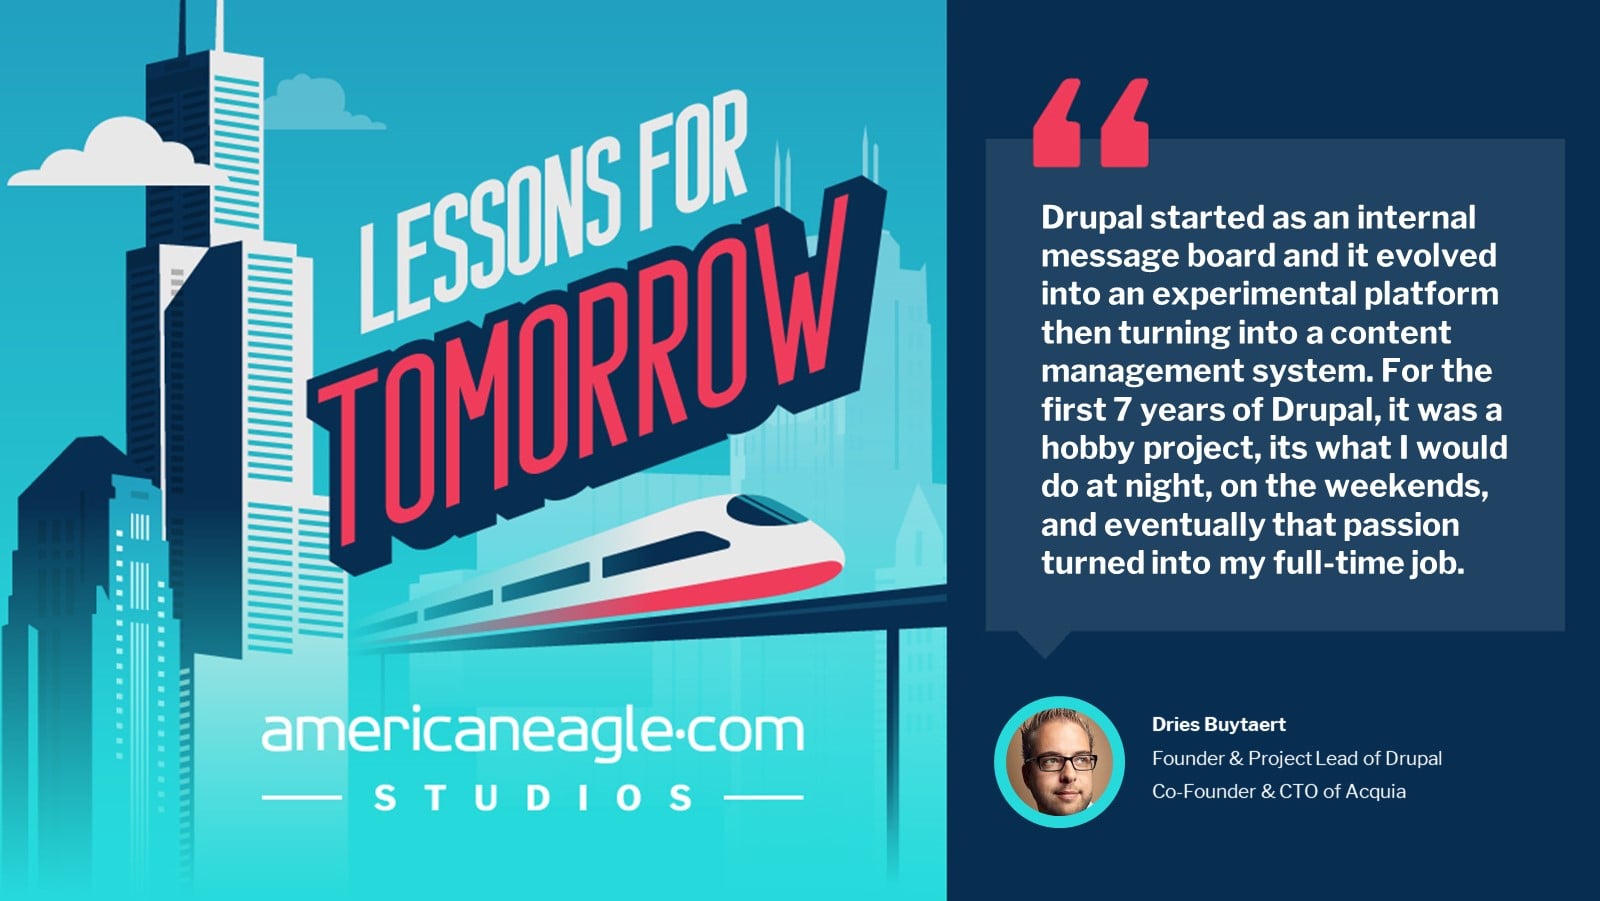 Drupal Founder, Dries Buytaert tells how he started the company